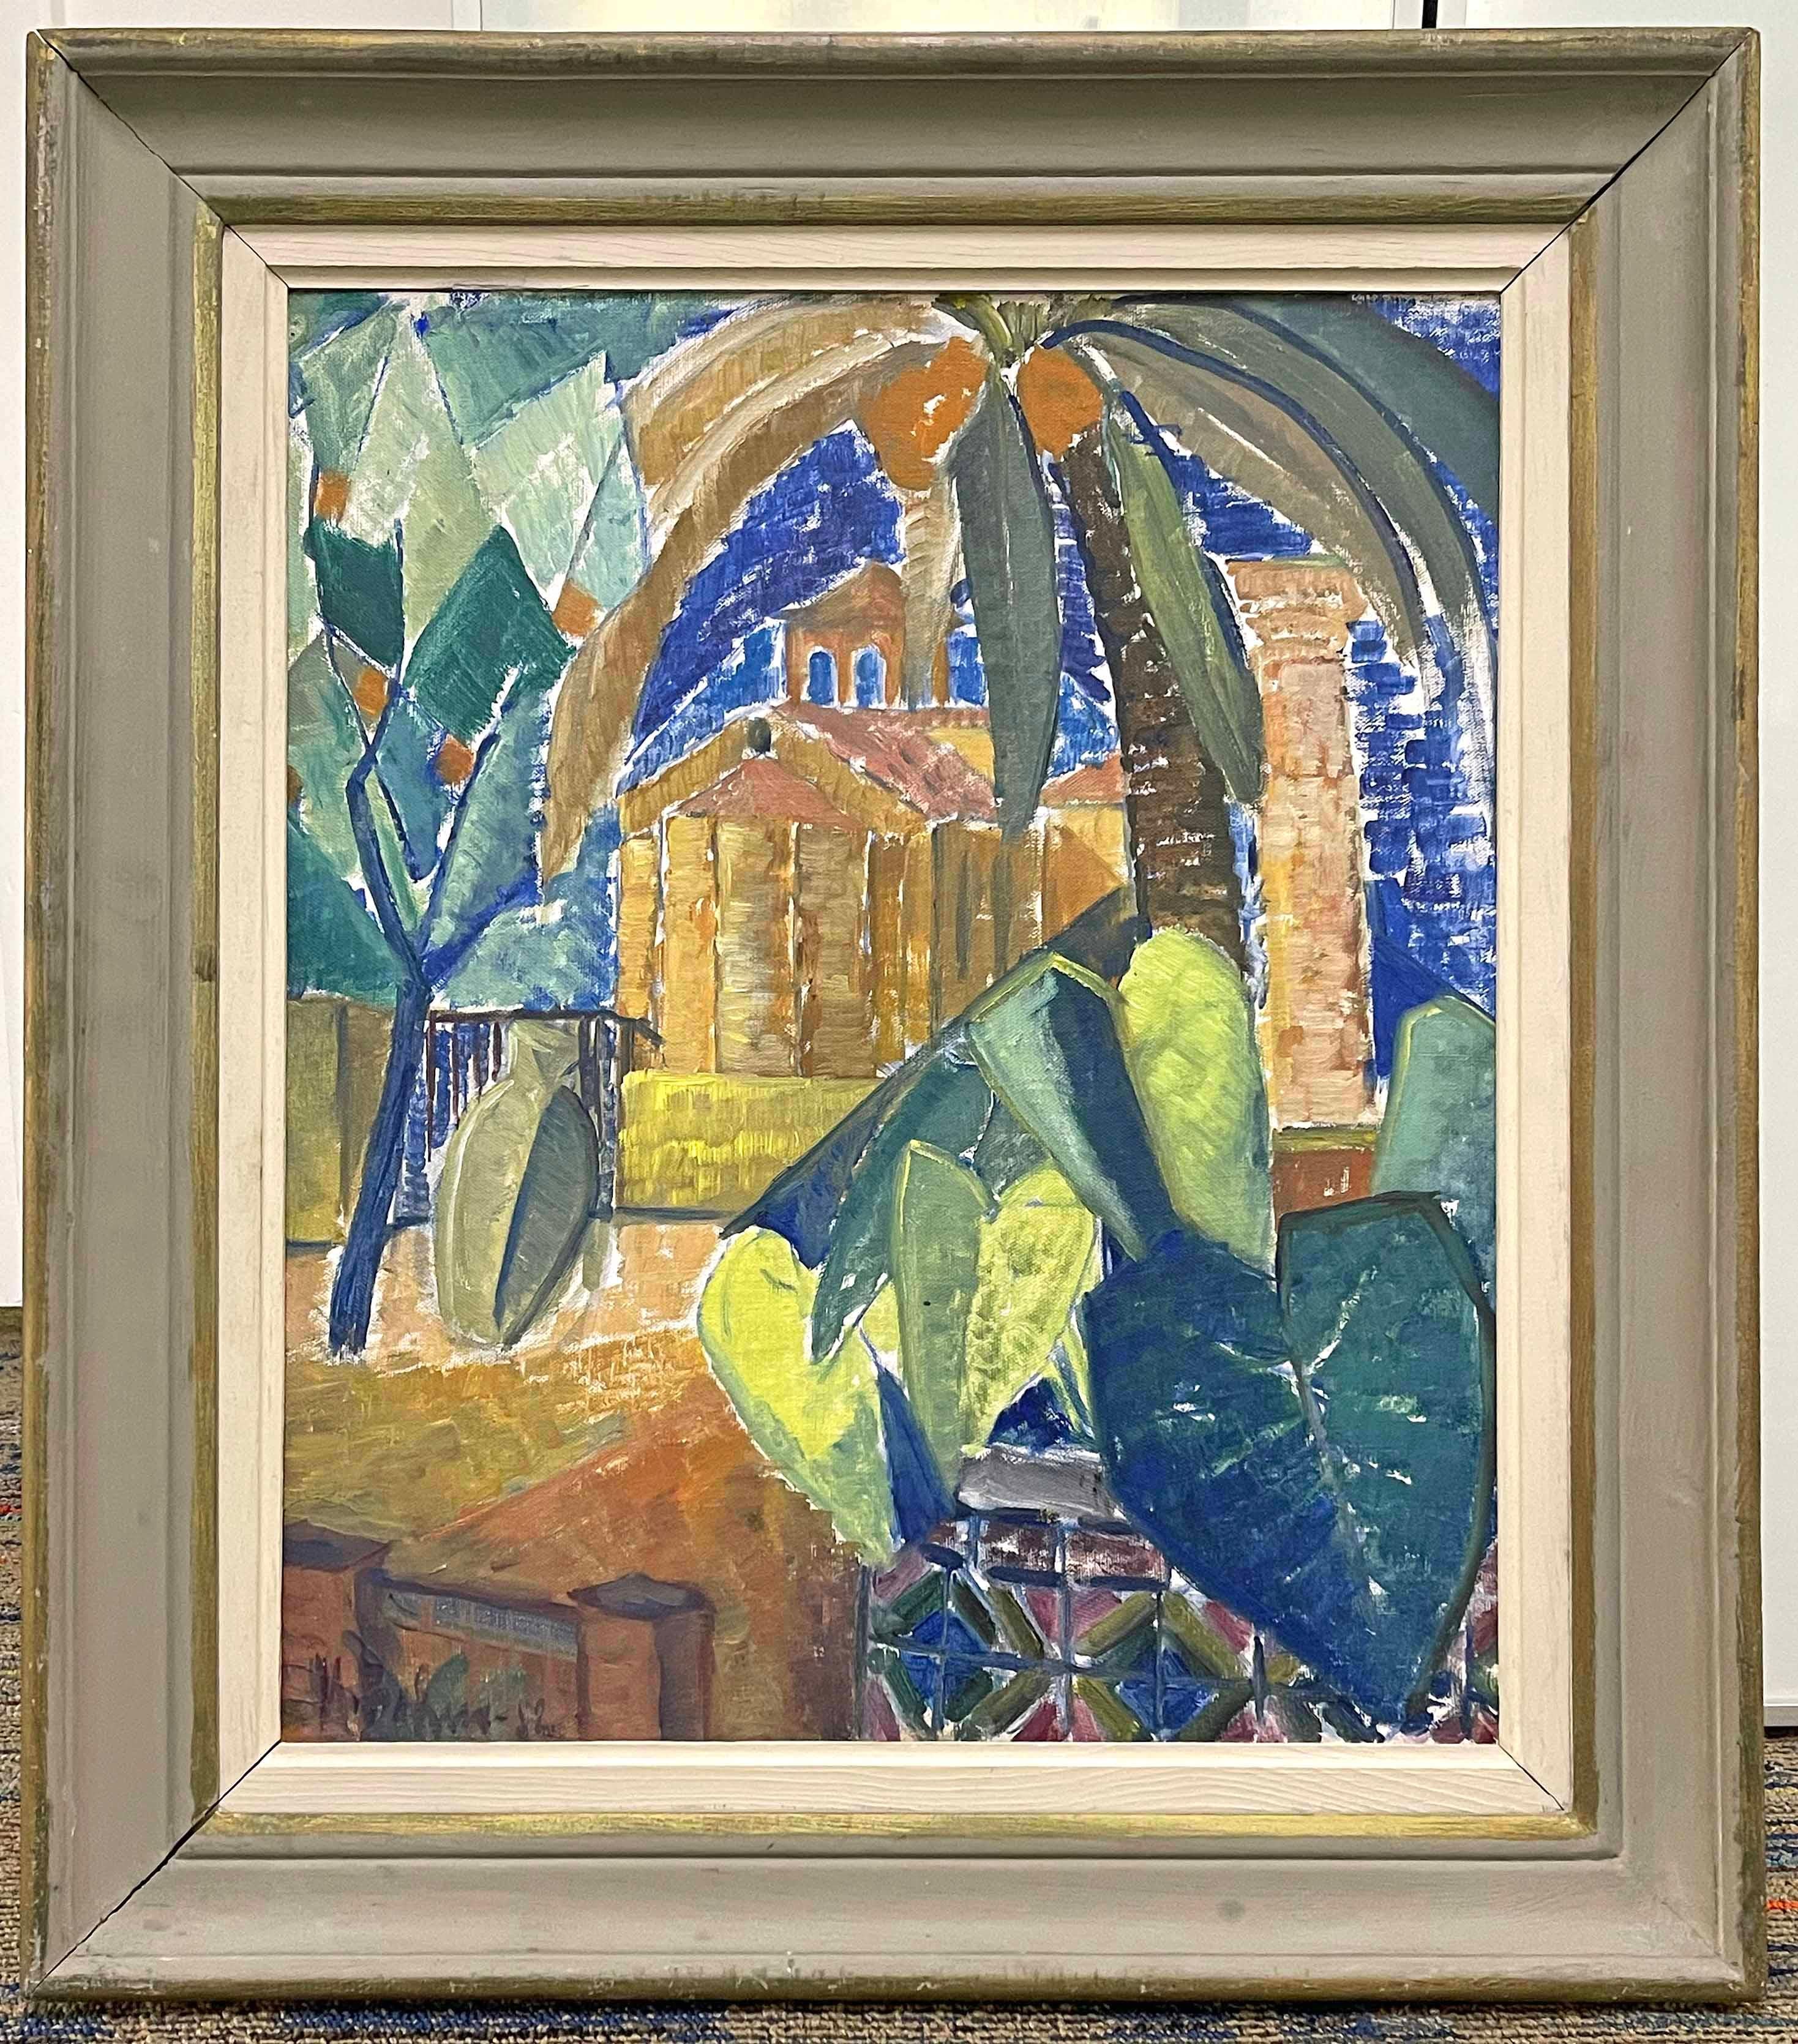 Brilliantly painted in tones of blue, green and warm brown, this fractured view of a church and palm trees along the Mediterranean, the building's tower and apse depicted in a golden glow, was painted by Marthe Bohm in 1952, after she started to